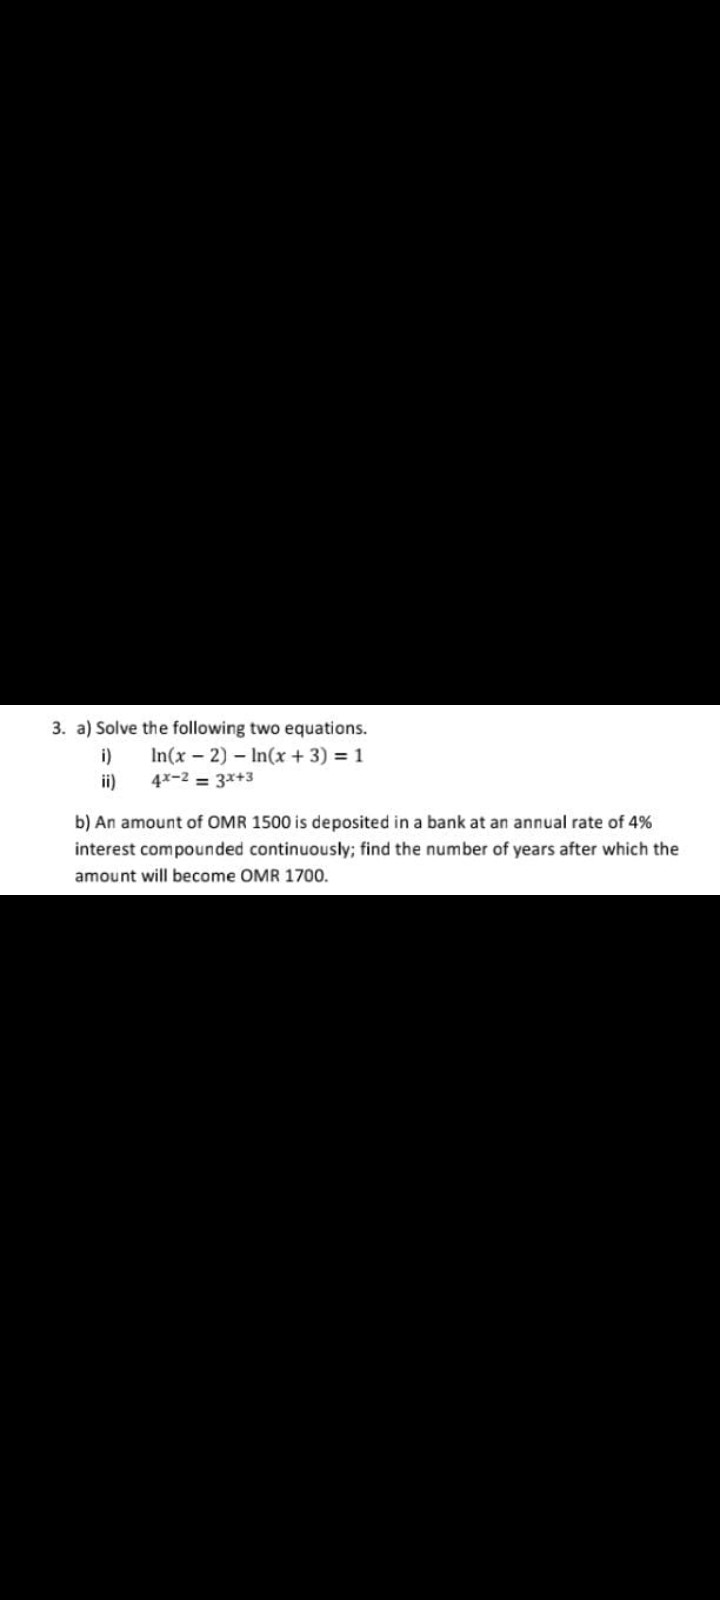 3. a) Solve the following two equations.
In(x – 2) – In(x + 3) = 1
i)
ii)
4x-2 = 3x+3
b) An amount of OMR 1500 is deposited in a bank at an annual rate of 4%
interest compounded continuously; find the number of years after which the
amount will become OMR 1700.
